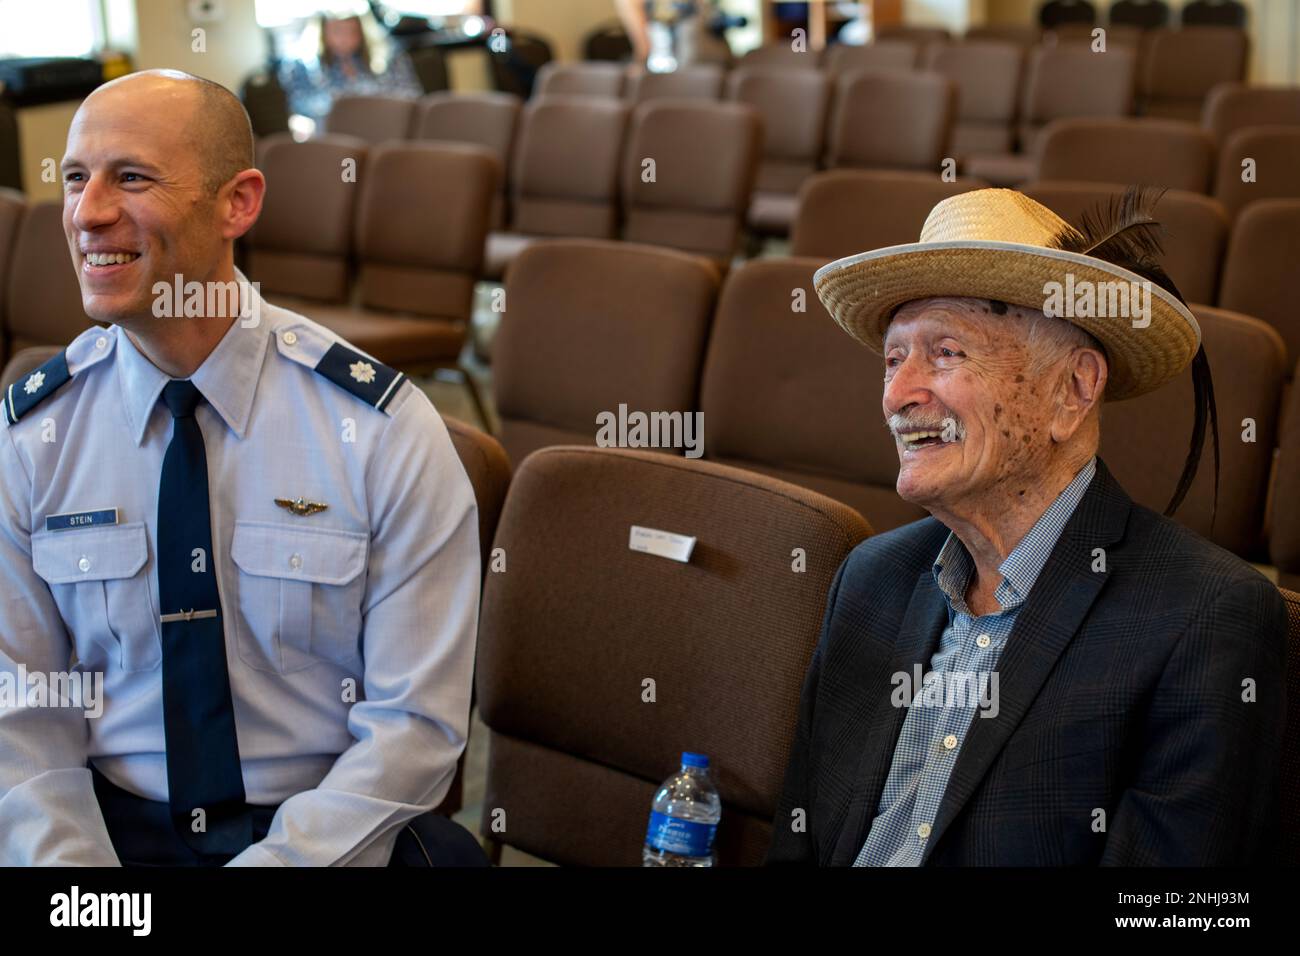 U.S. Air Force Lt. Col. Stein (left), 502nd Operations Support Squadron commander, talks with U.S. Army Air Corps 1st Lt. Gerald Teldon, retired, before Teldon’s award ceremony for his honorable service as a pilot on July 29, 2022, at the Chabad Center for Jewish Life and Learning, San Antonio, Texas. Teldon, born in Bronx, N.Y., in 1924, joined the military in 1944. He completed 62 missions during WWII and the Korean War. Lt. Col. Andrew Stein, 502nd Operations Support Squadron commander, was the presiding officers. The awards presented to Teldon are as follows: the Air Medal; American Campai Stock Photo